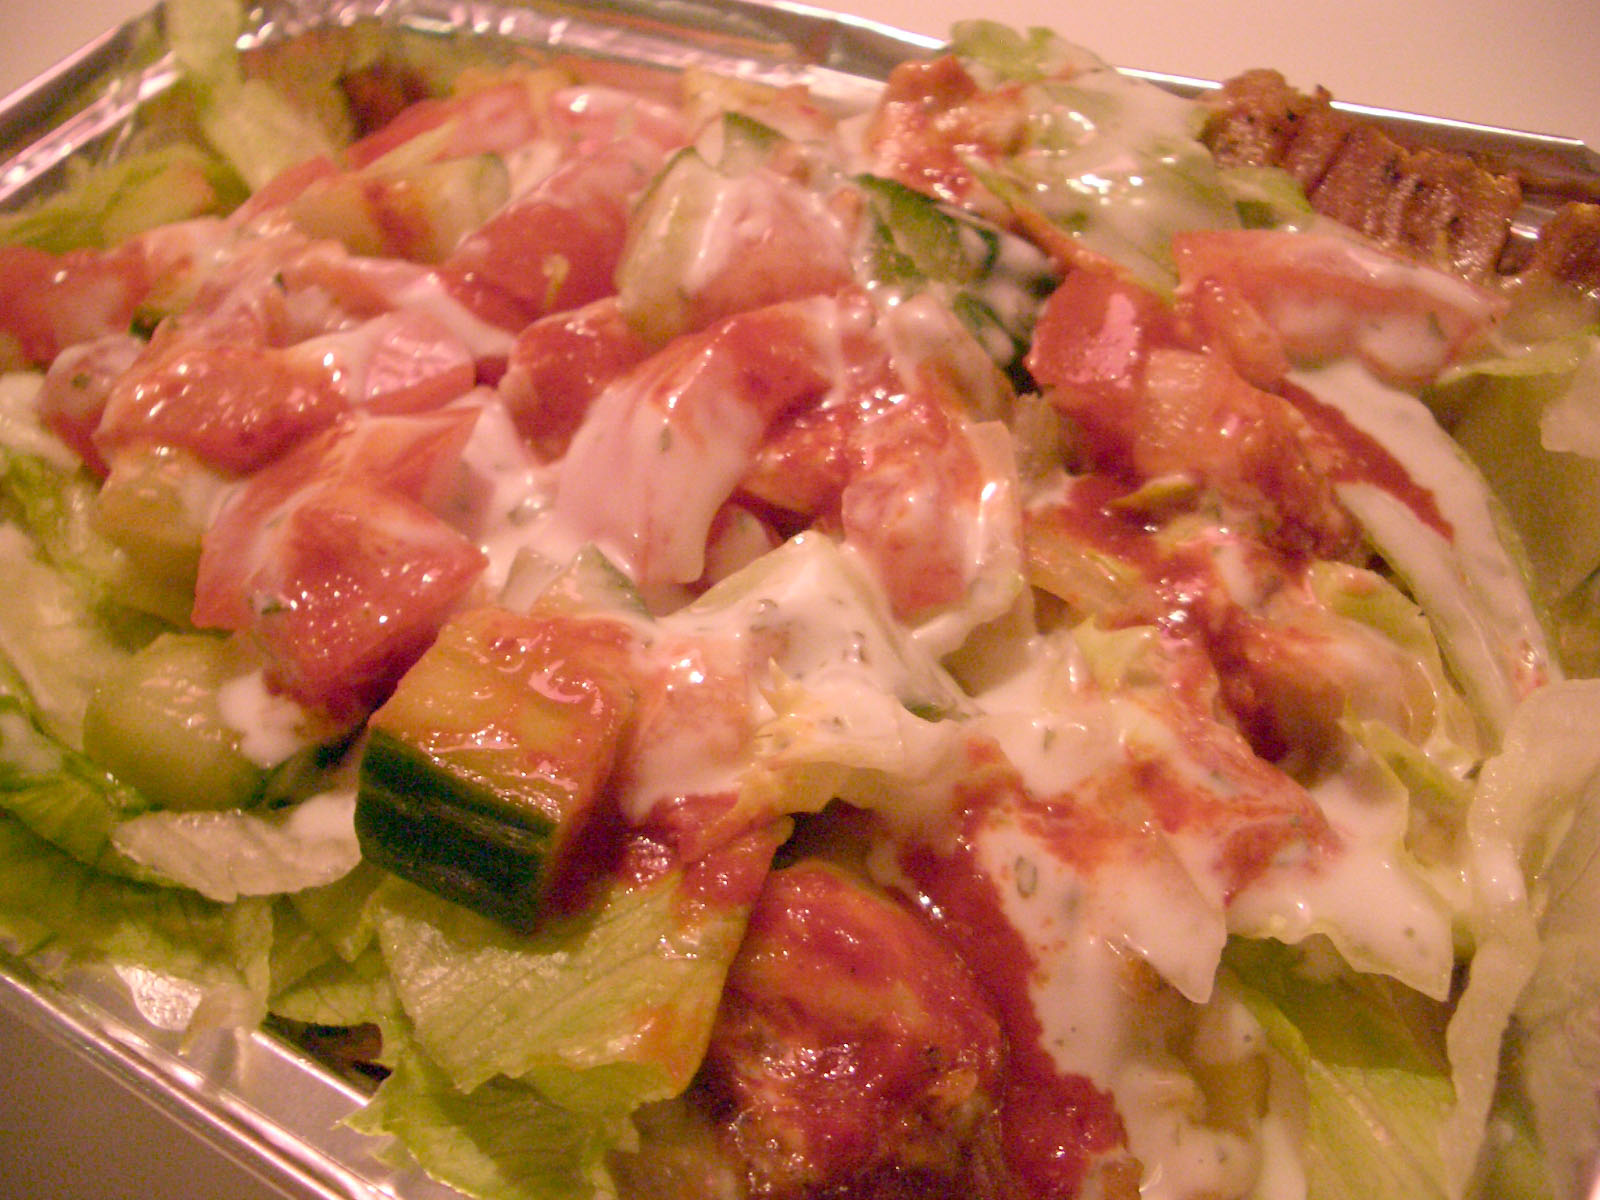 salad with meats, lettuce and sauce on it